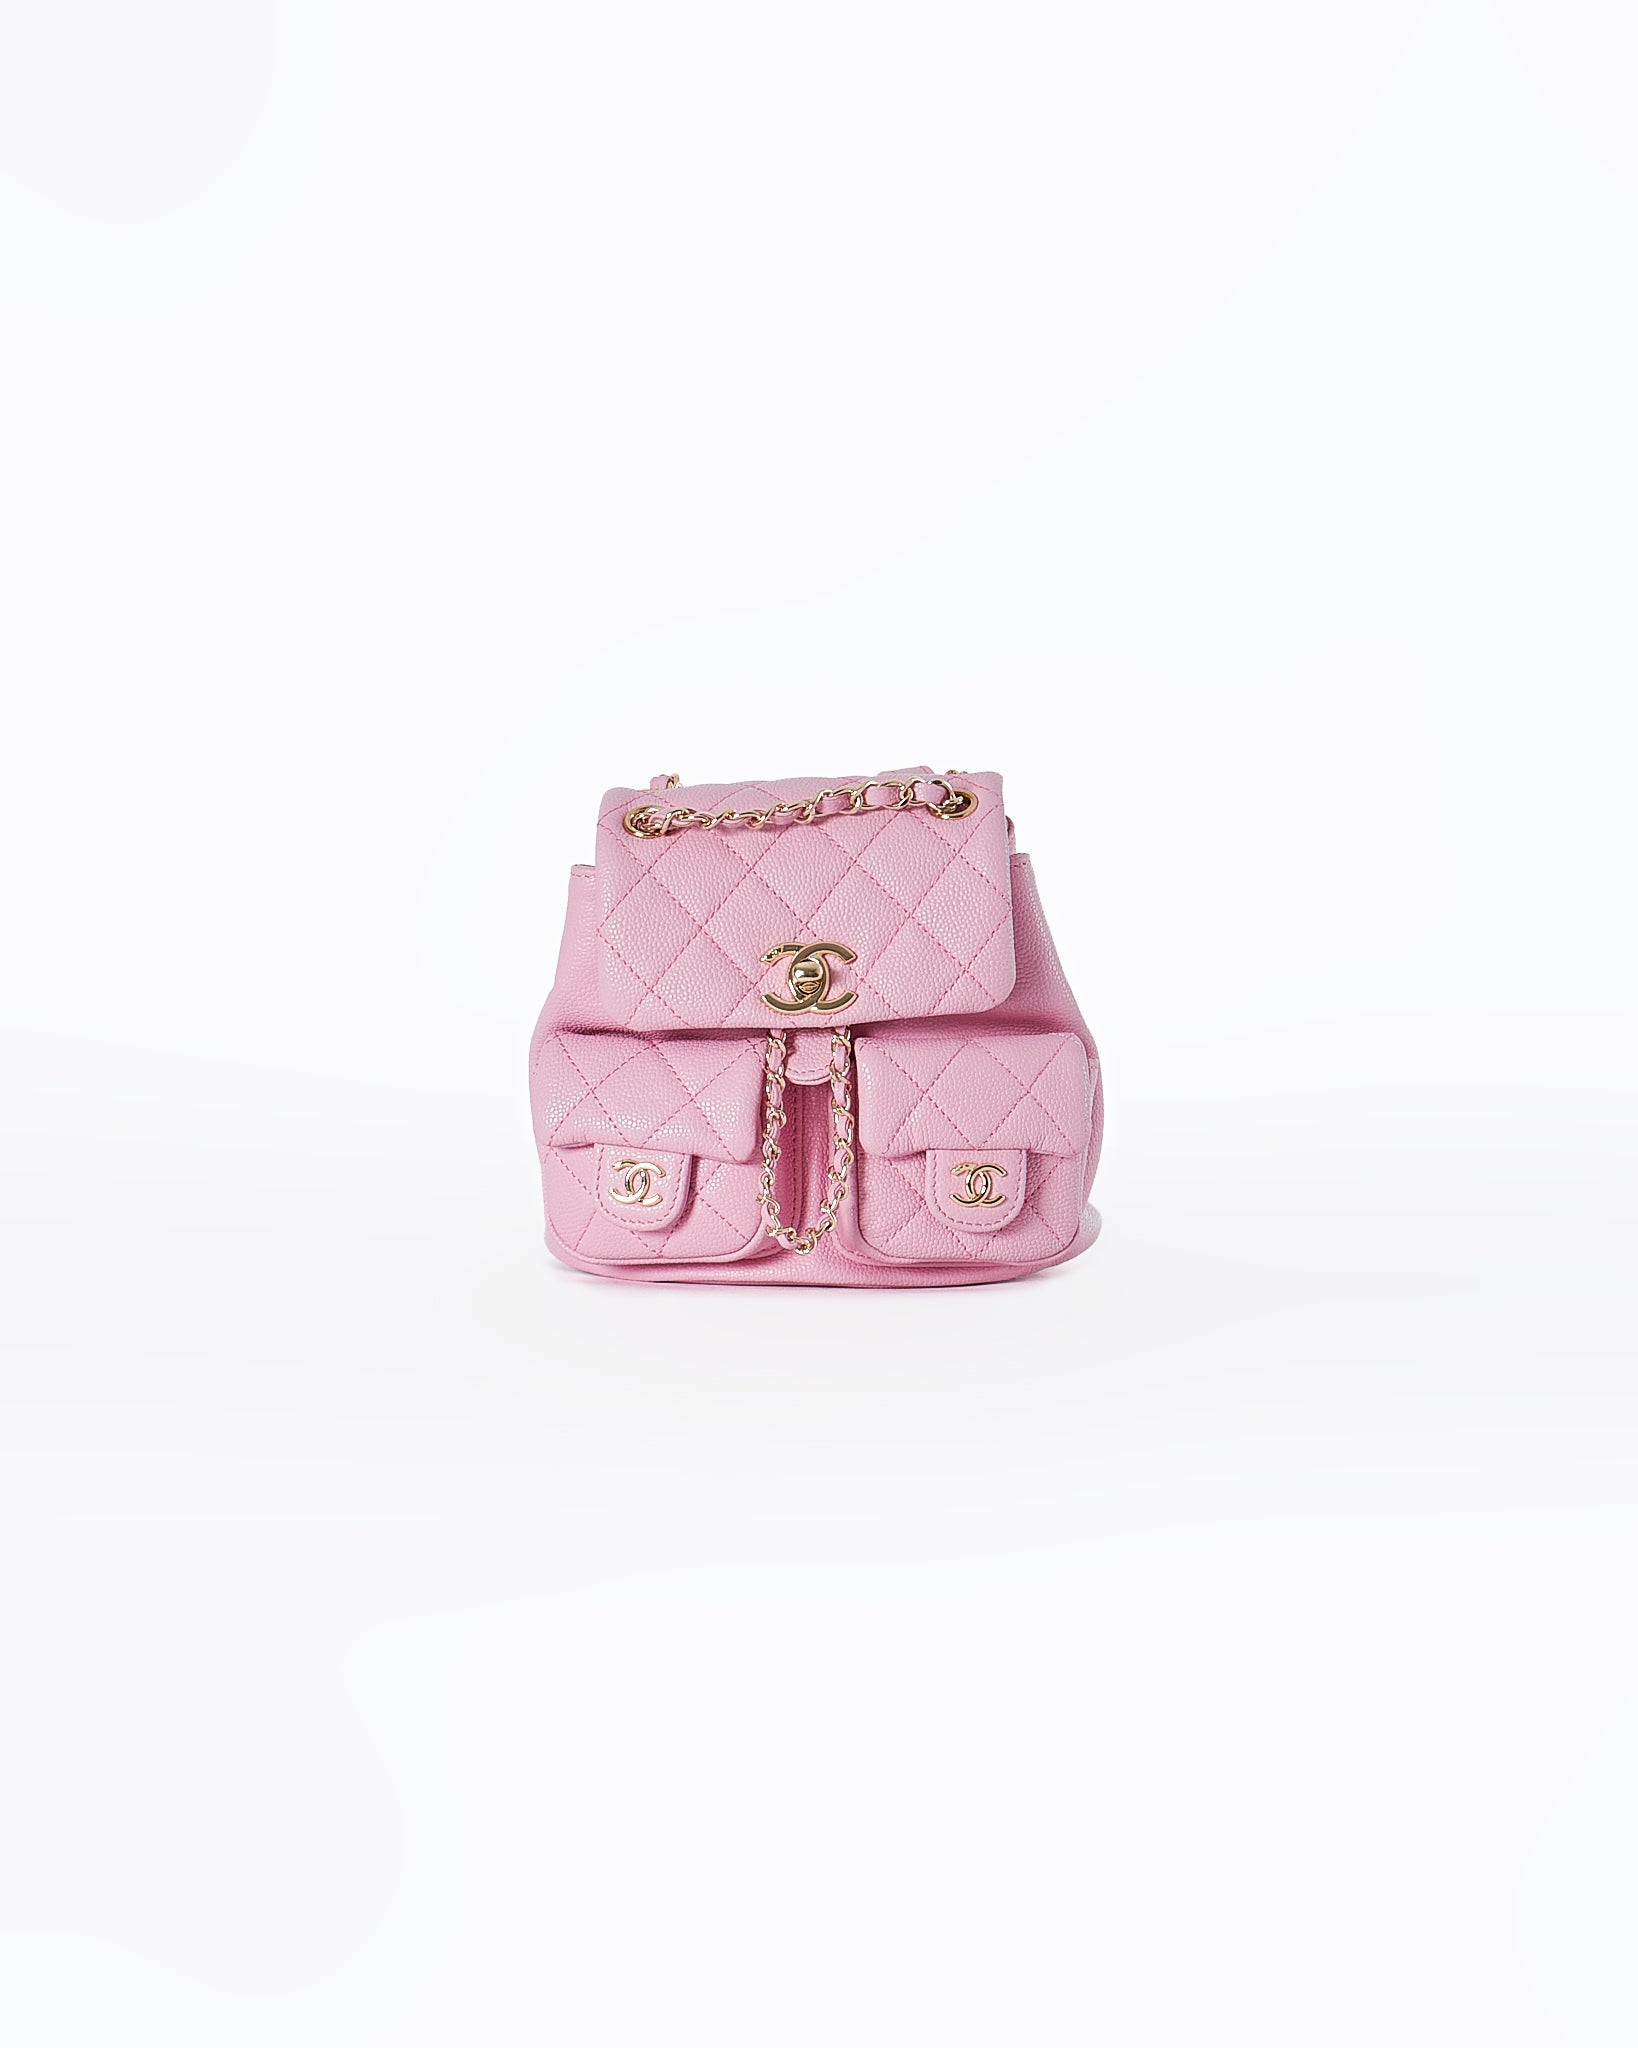 MOI OUTFIT-Chanel Lady Mini Backpack 279